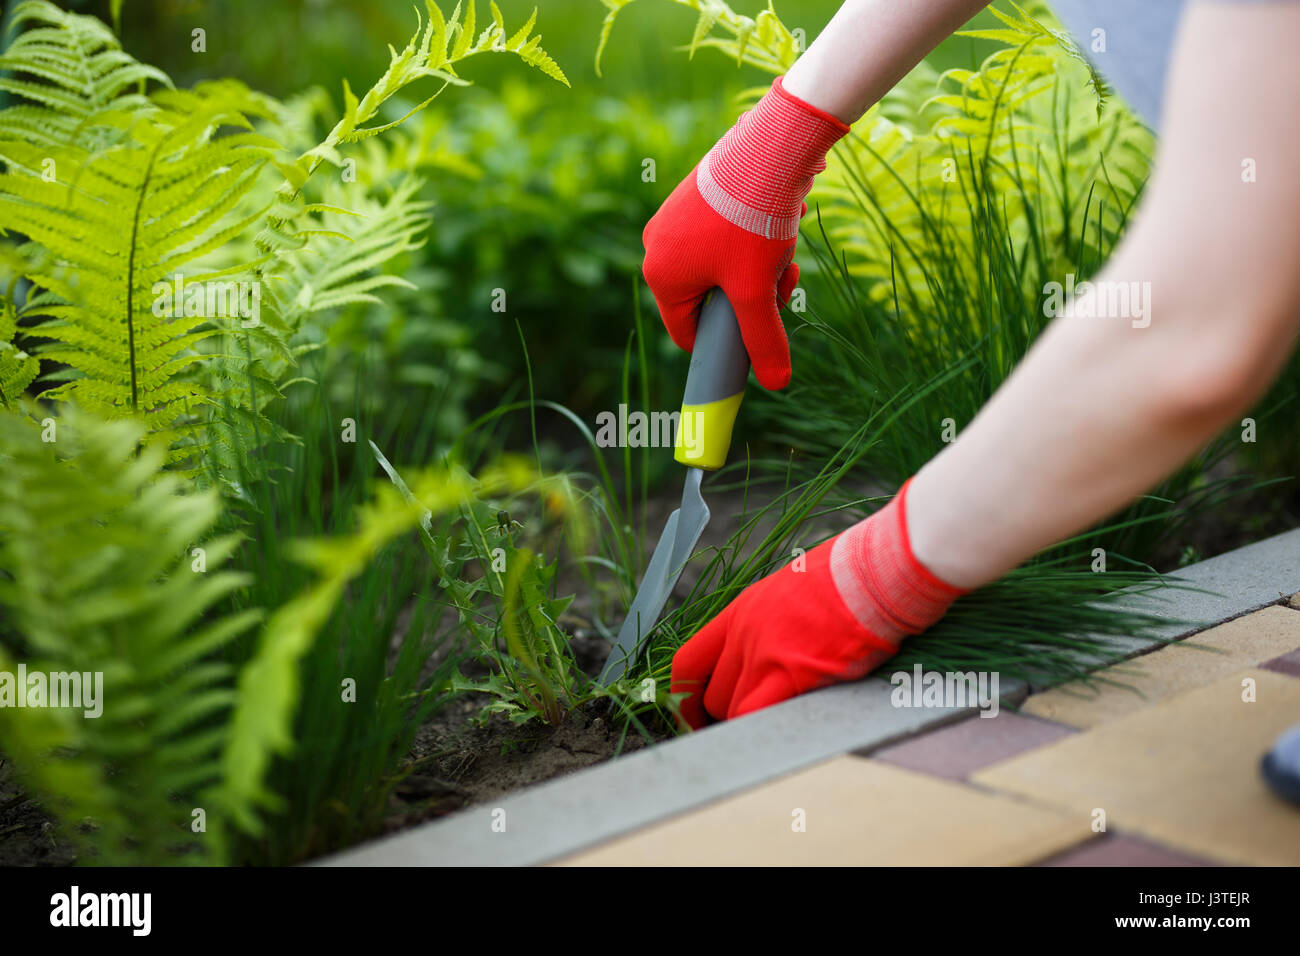 Photo of gloved woman hand holding weed and tool removing it from soil. Stock Photo